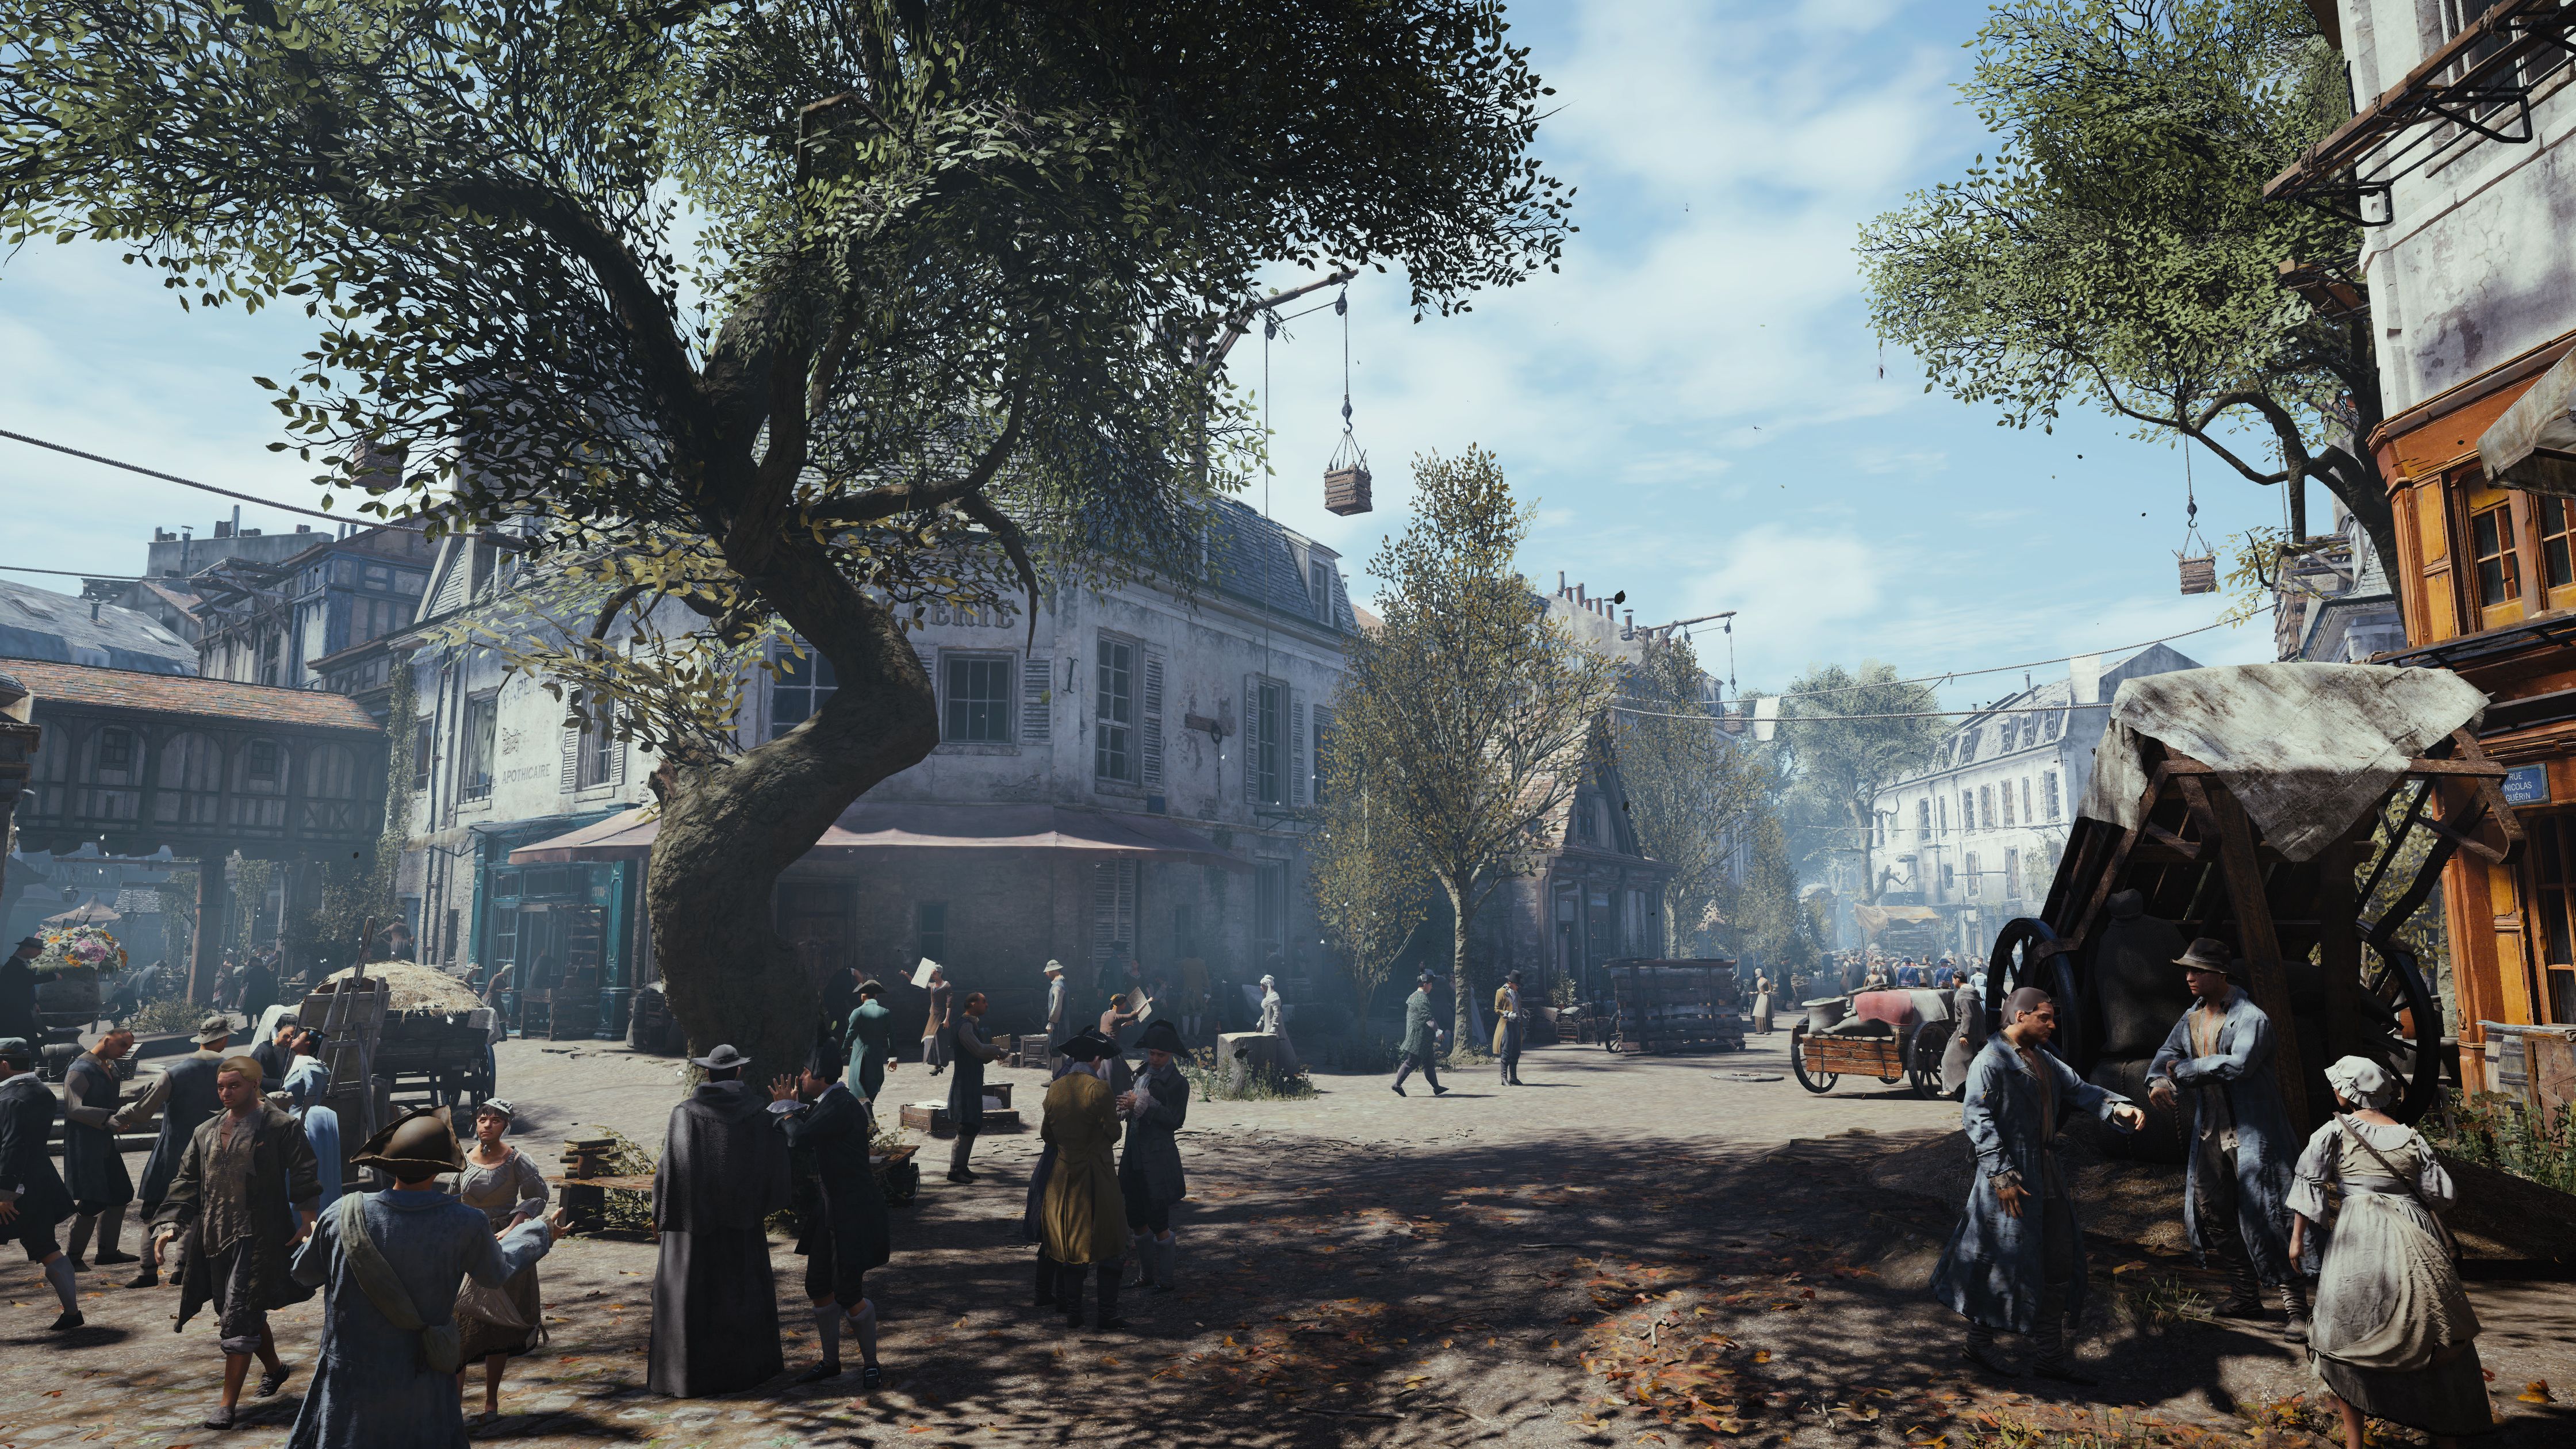 assassin s creed 5 unity preview familiar format draws upon multi player to evolve series image 14